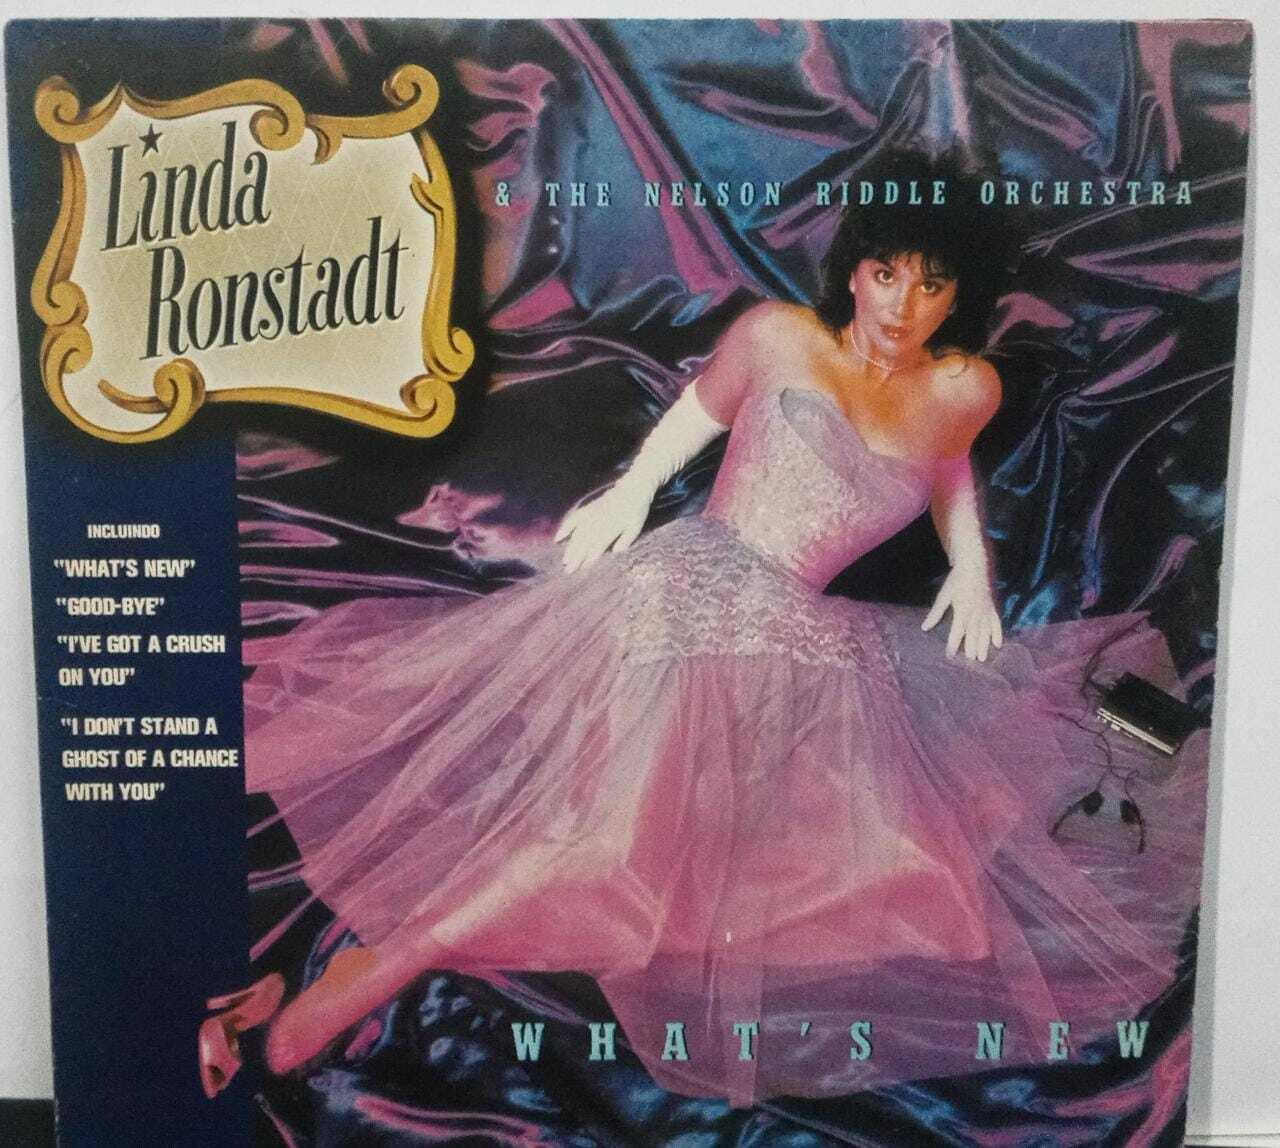 Vinil - Linda Ronstadt and The Nelson Riddle Orchestra - Whats New